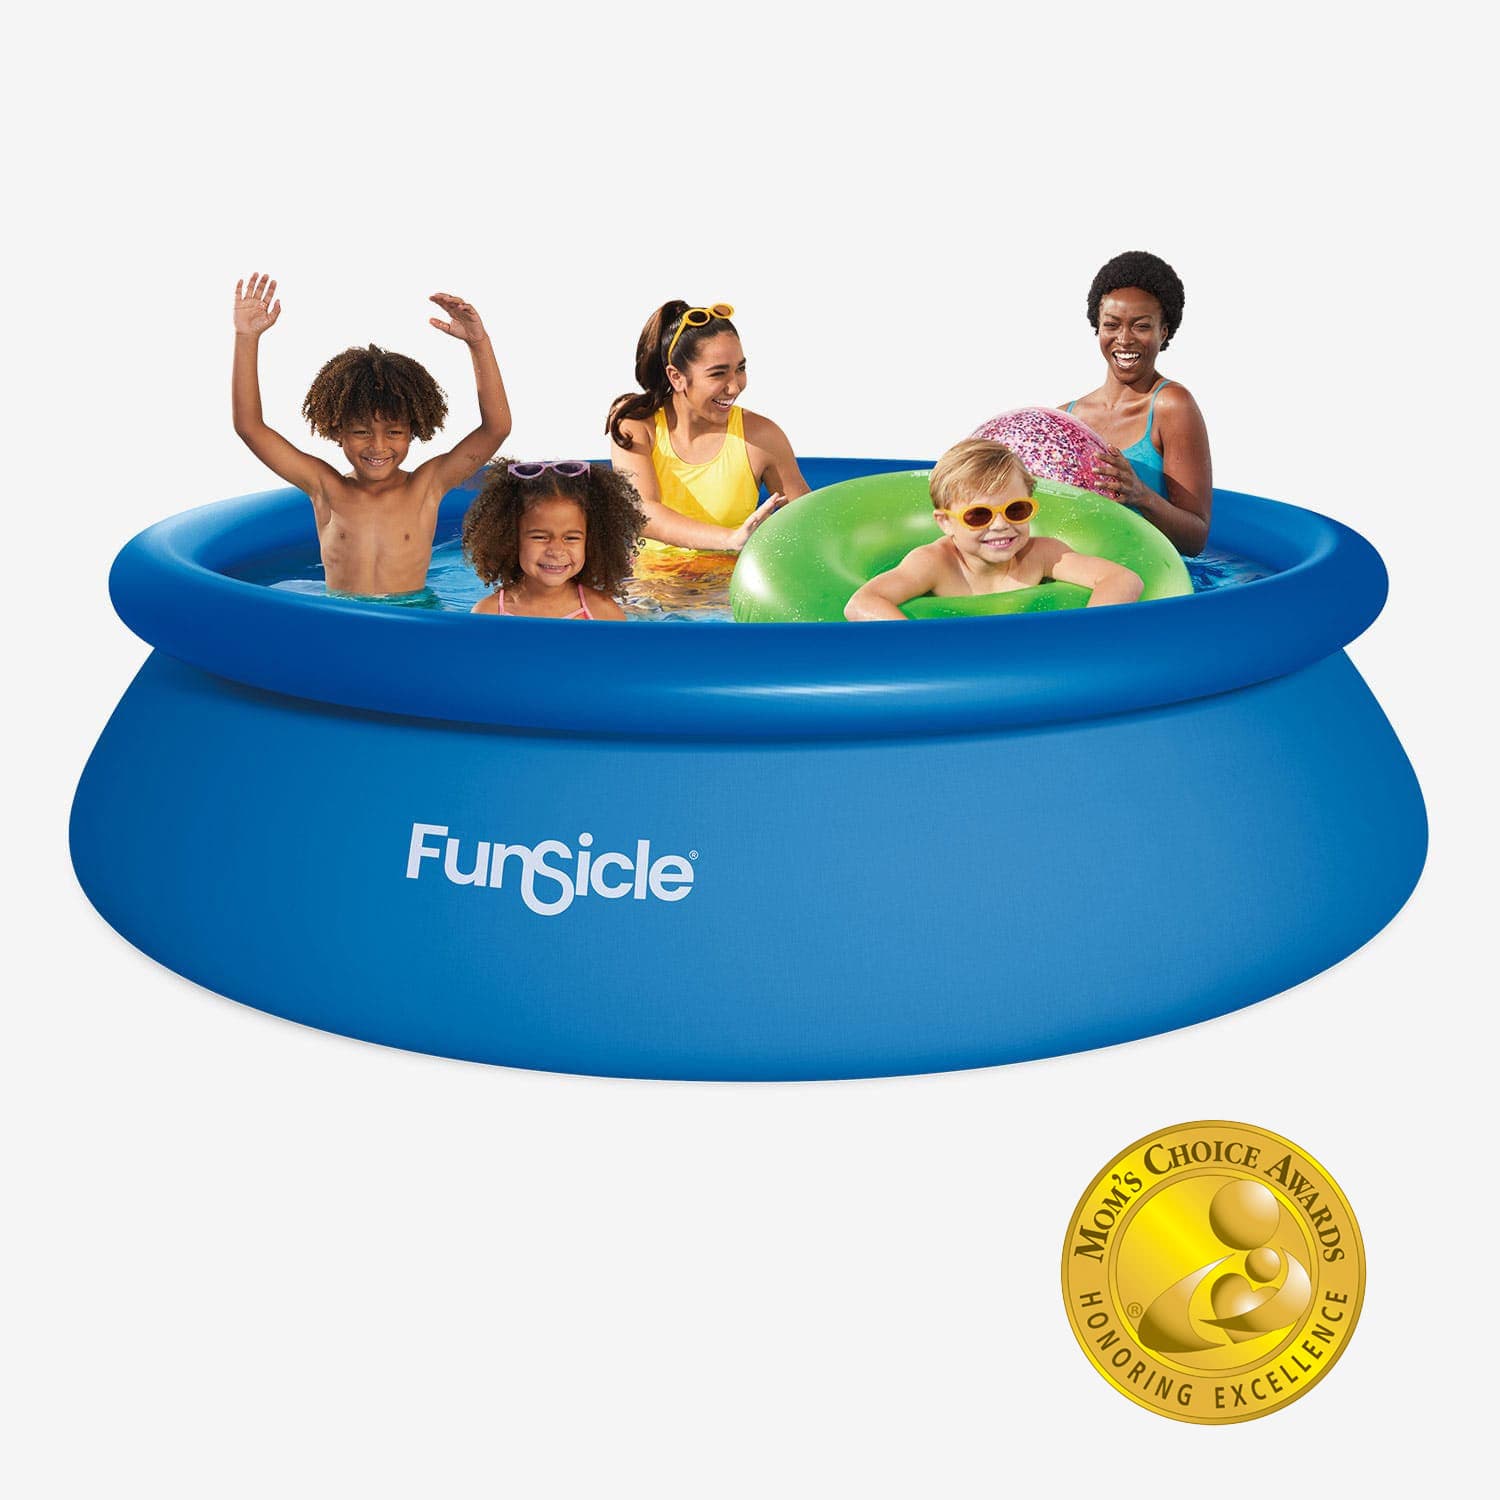 Funsicle 10 ft QuickSet Pool with People